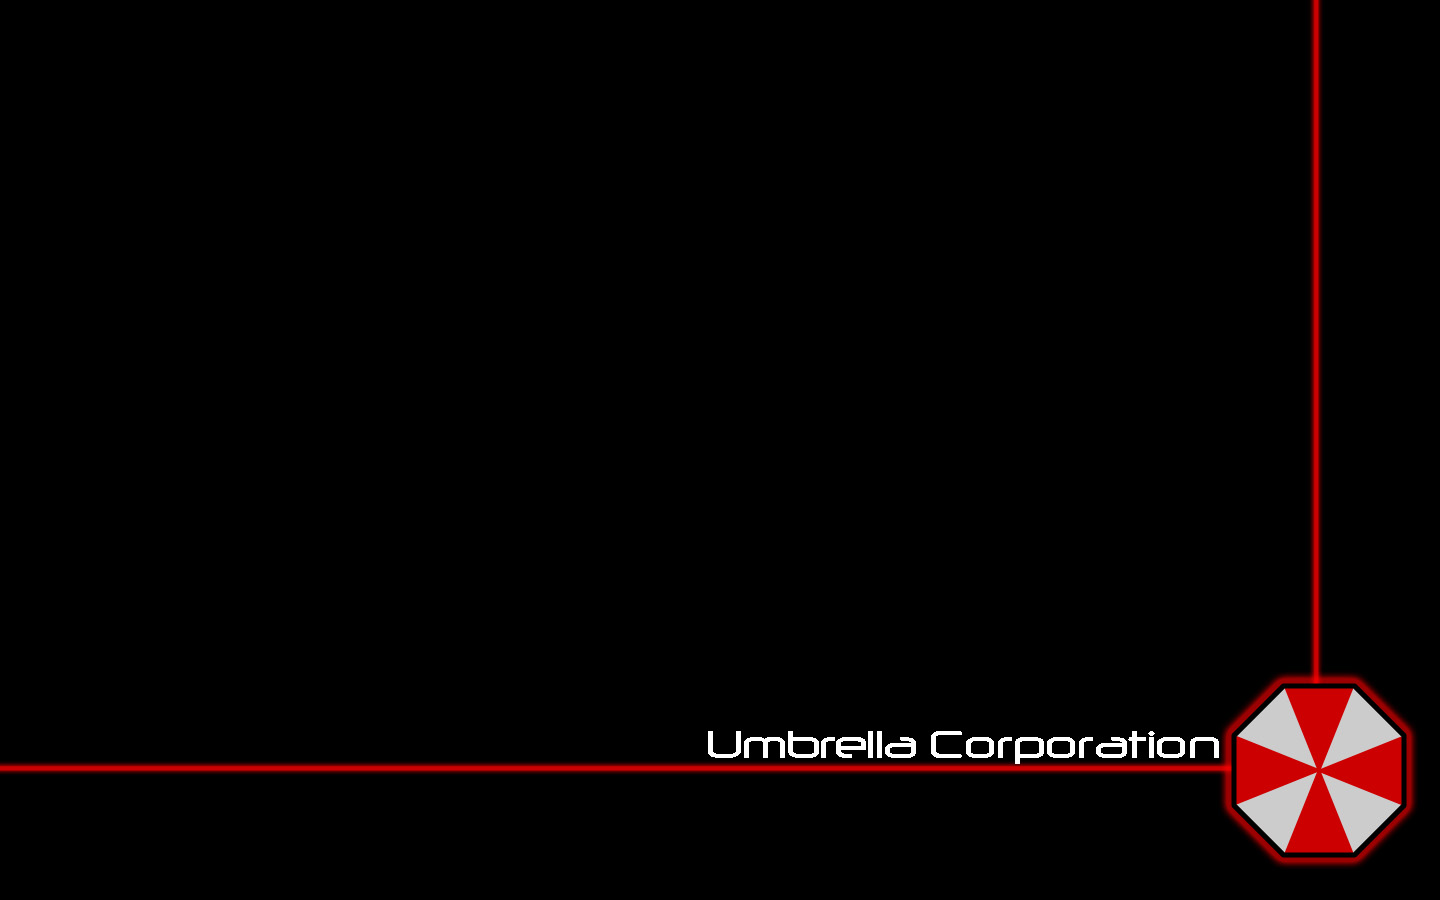 Resident Evil Video Games Umbrella Corp Hd Jpg 49561 With Resolutions